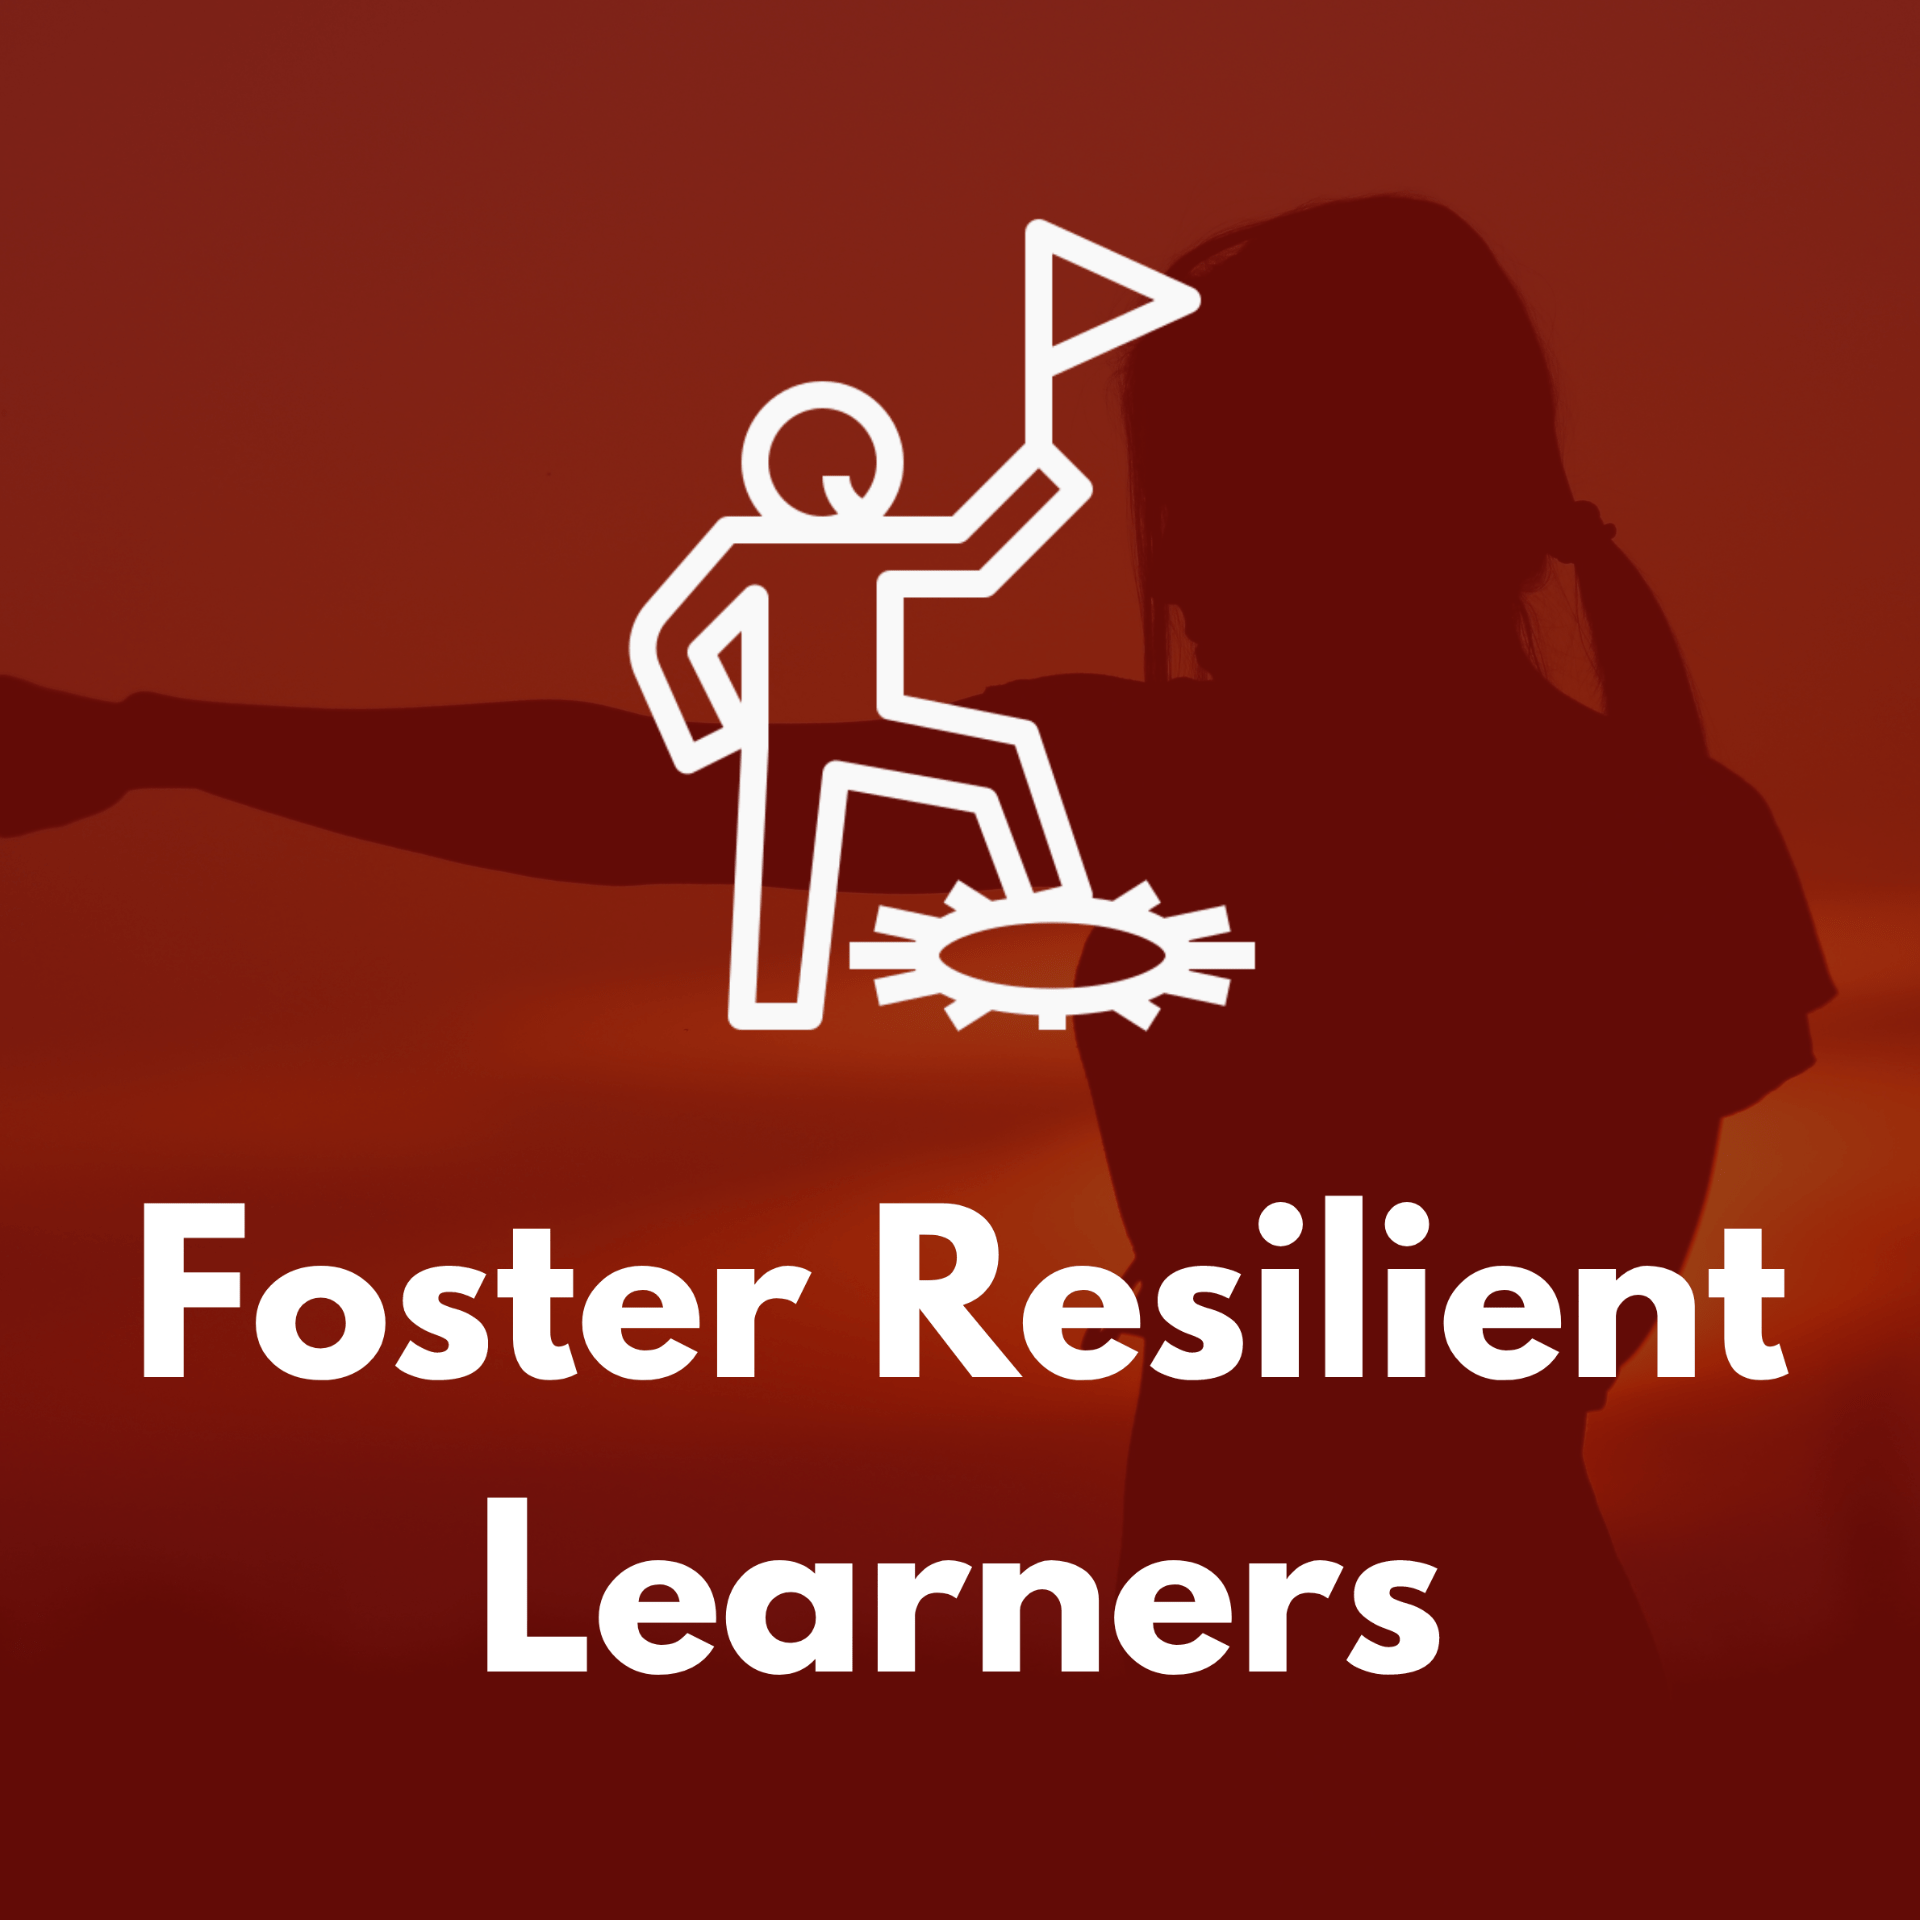 Foster Resilient Learners